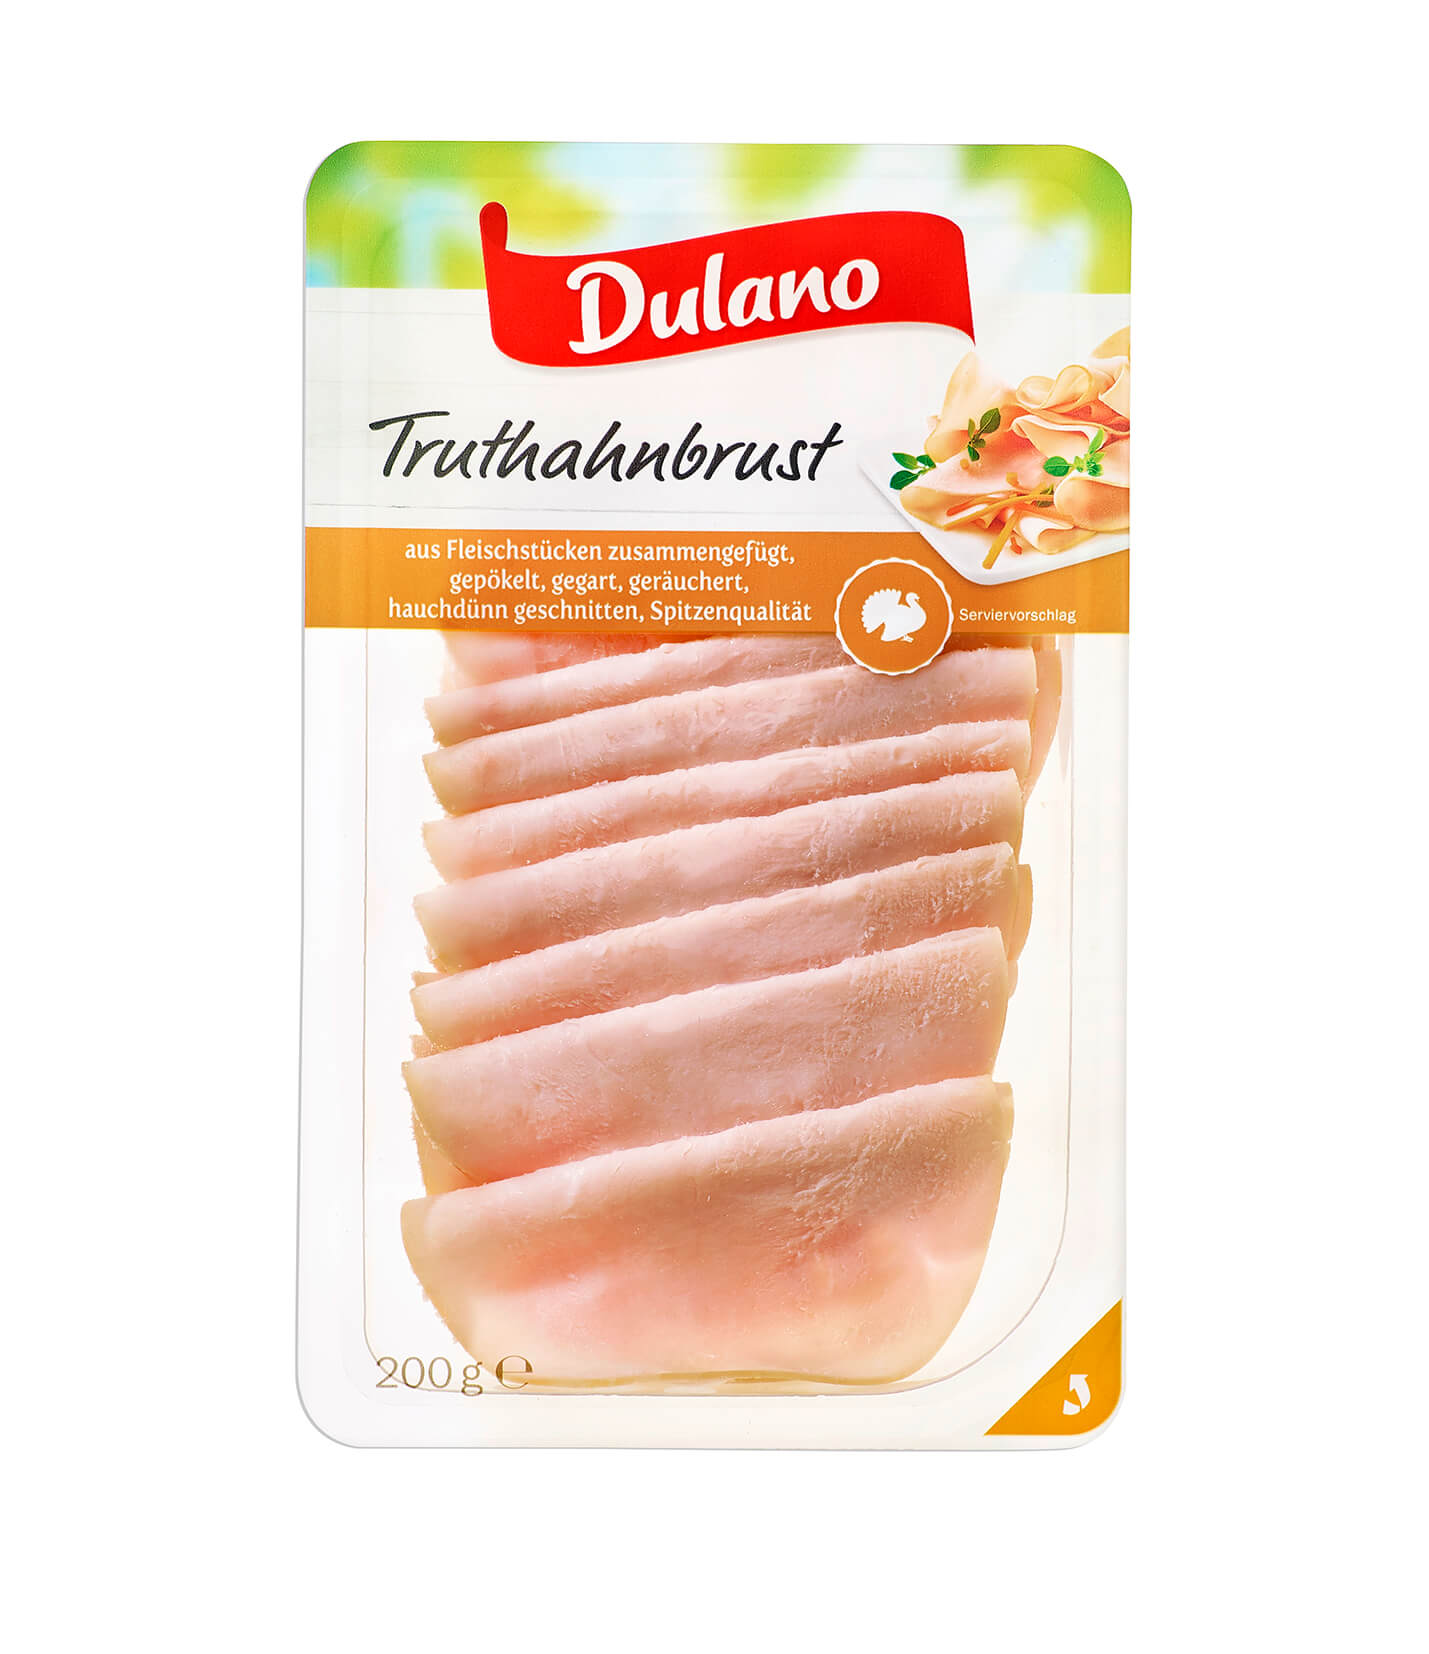 (Lidl) Truthahnbrust GmbH The Prepared/Processed Hauchdünnschnitt - Beverage Mixed Sausages mynetfair / Sausages Species - Tobacco grams) (200 Prepared/Processed Dulano · Meat/Poultry Butchers · / Food Meat/Poultry/Sausages Family Germany